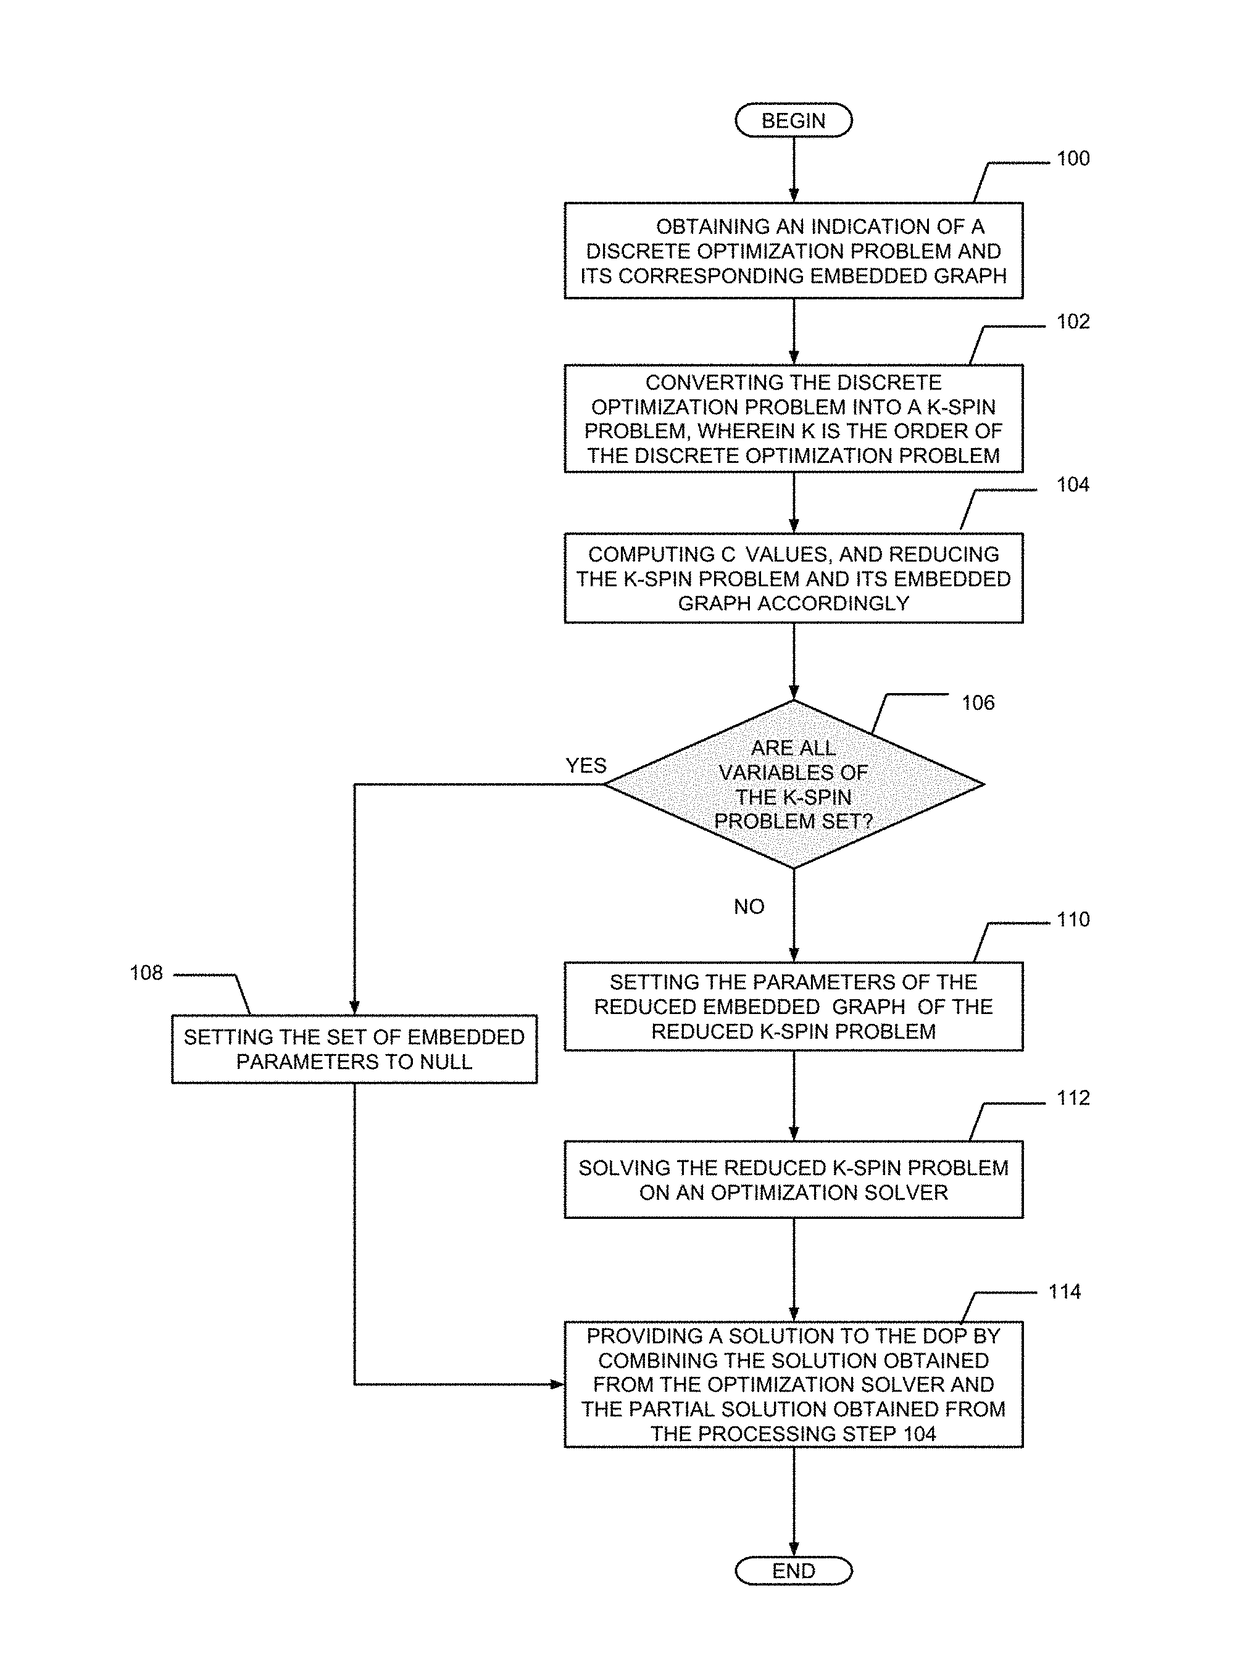 Method and system for setting parameters of a discrete optimization problem embedded to an optimization solver and solving the embedded discrete optimization problem